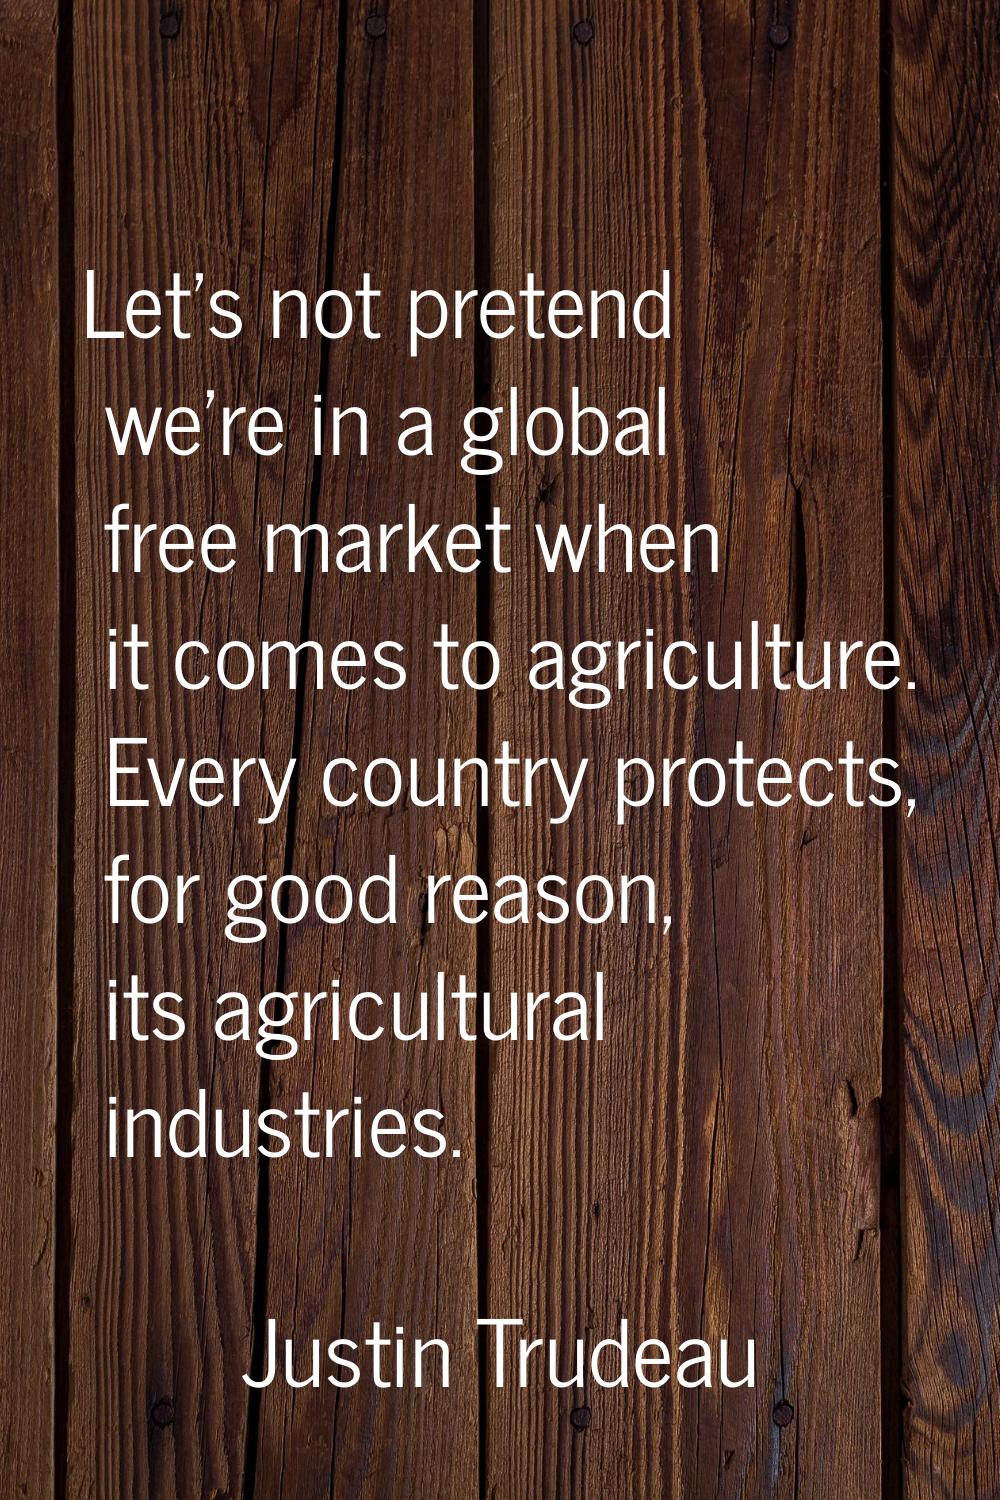 Let's not pretend we're in a global free market when it comes to agriculture. Every country protect